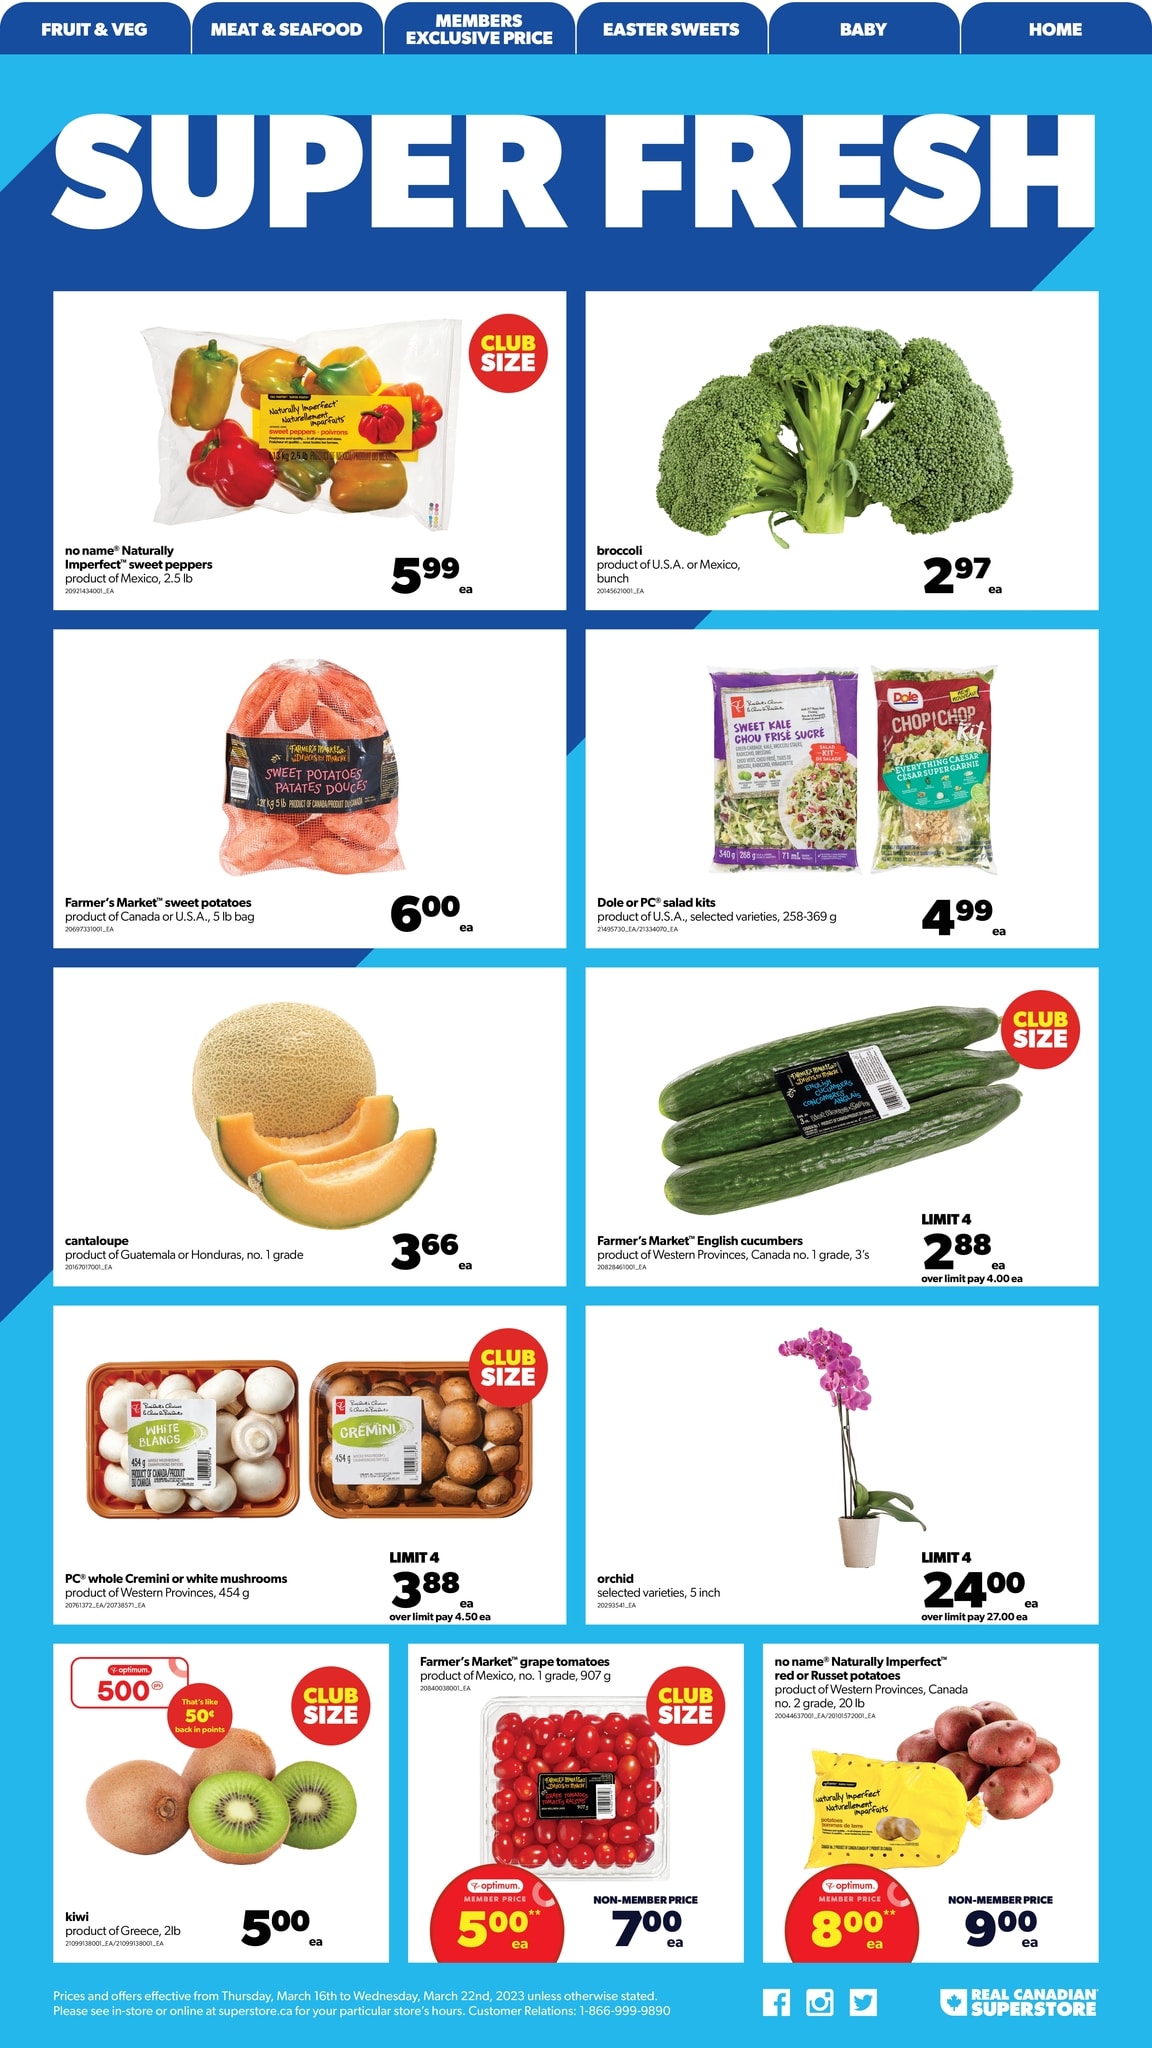 Real Canadian Superstore - Western Canada - Weekly Flyer Specials - Page 2